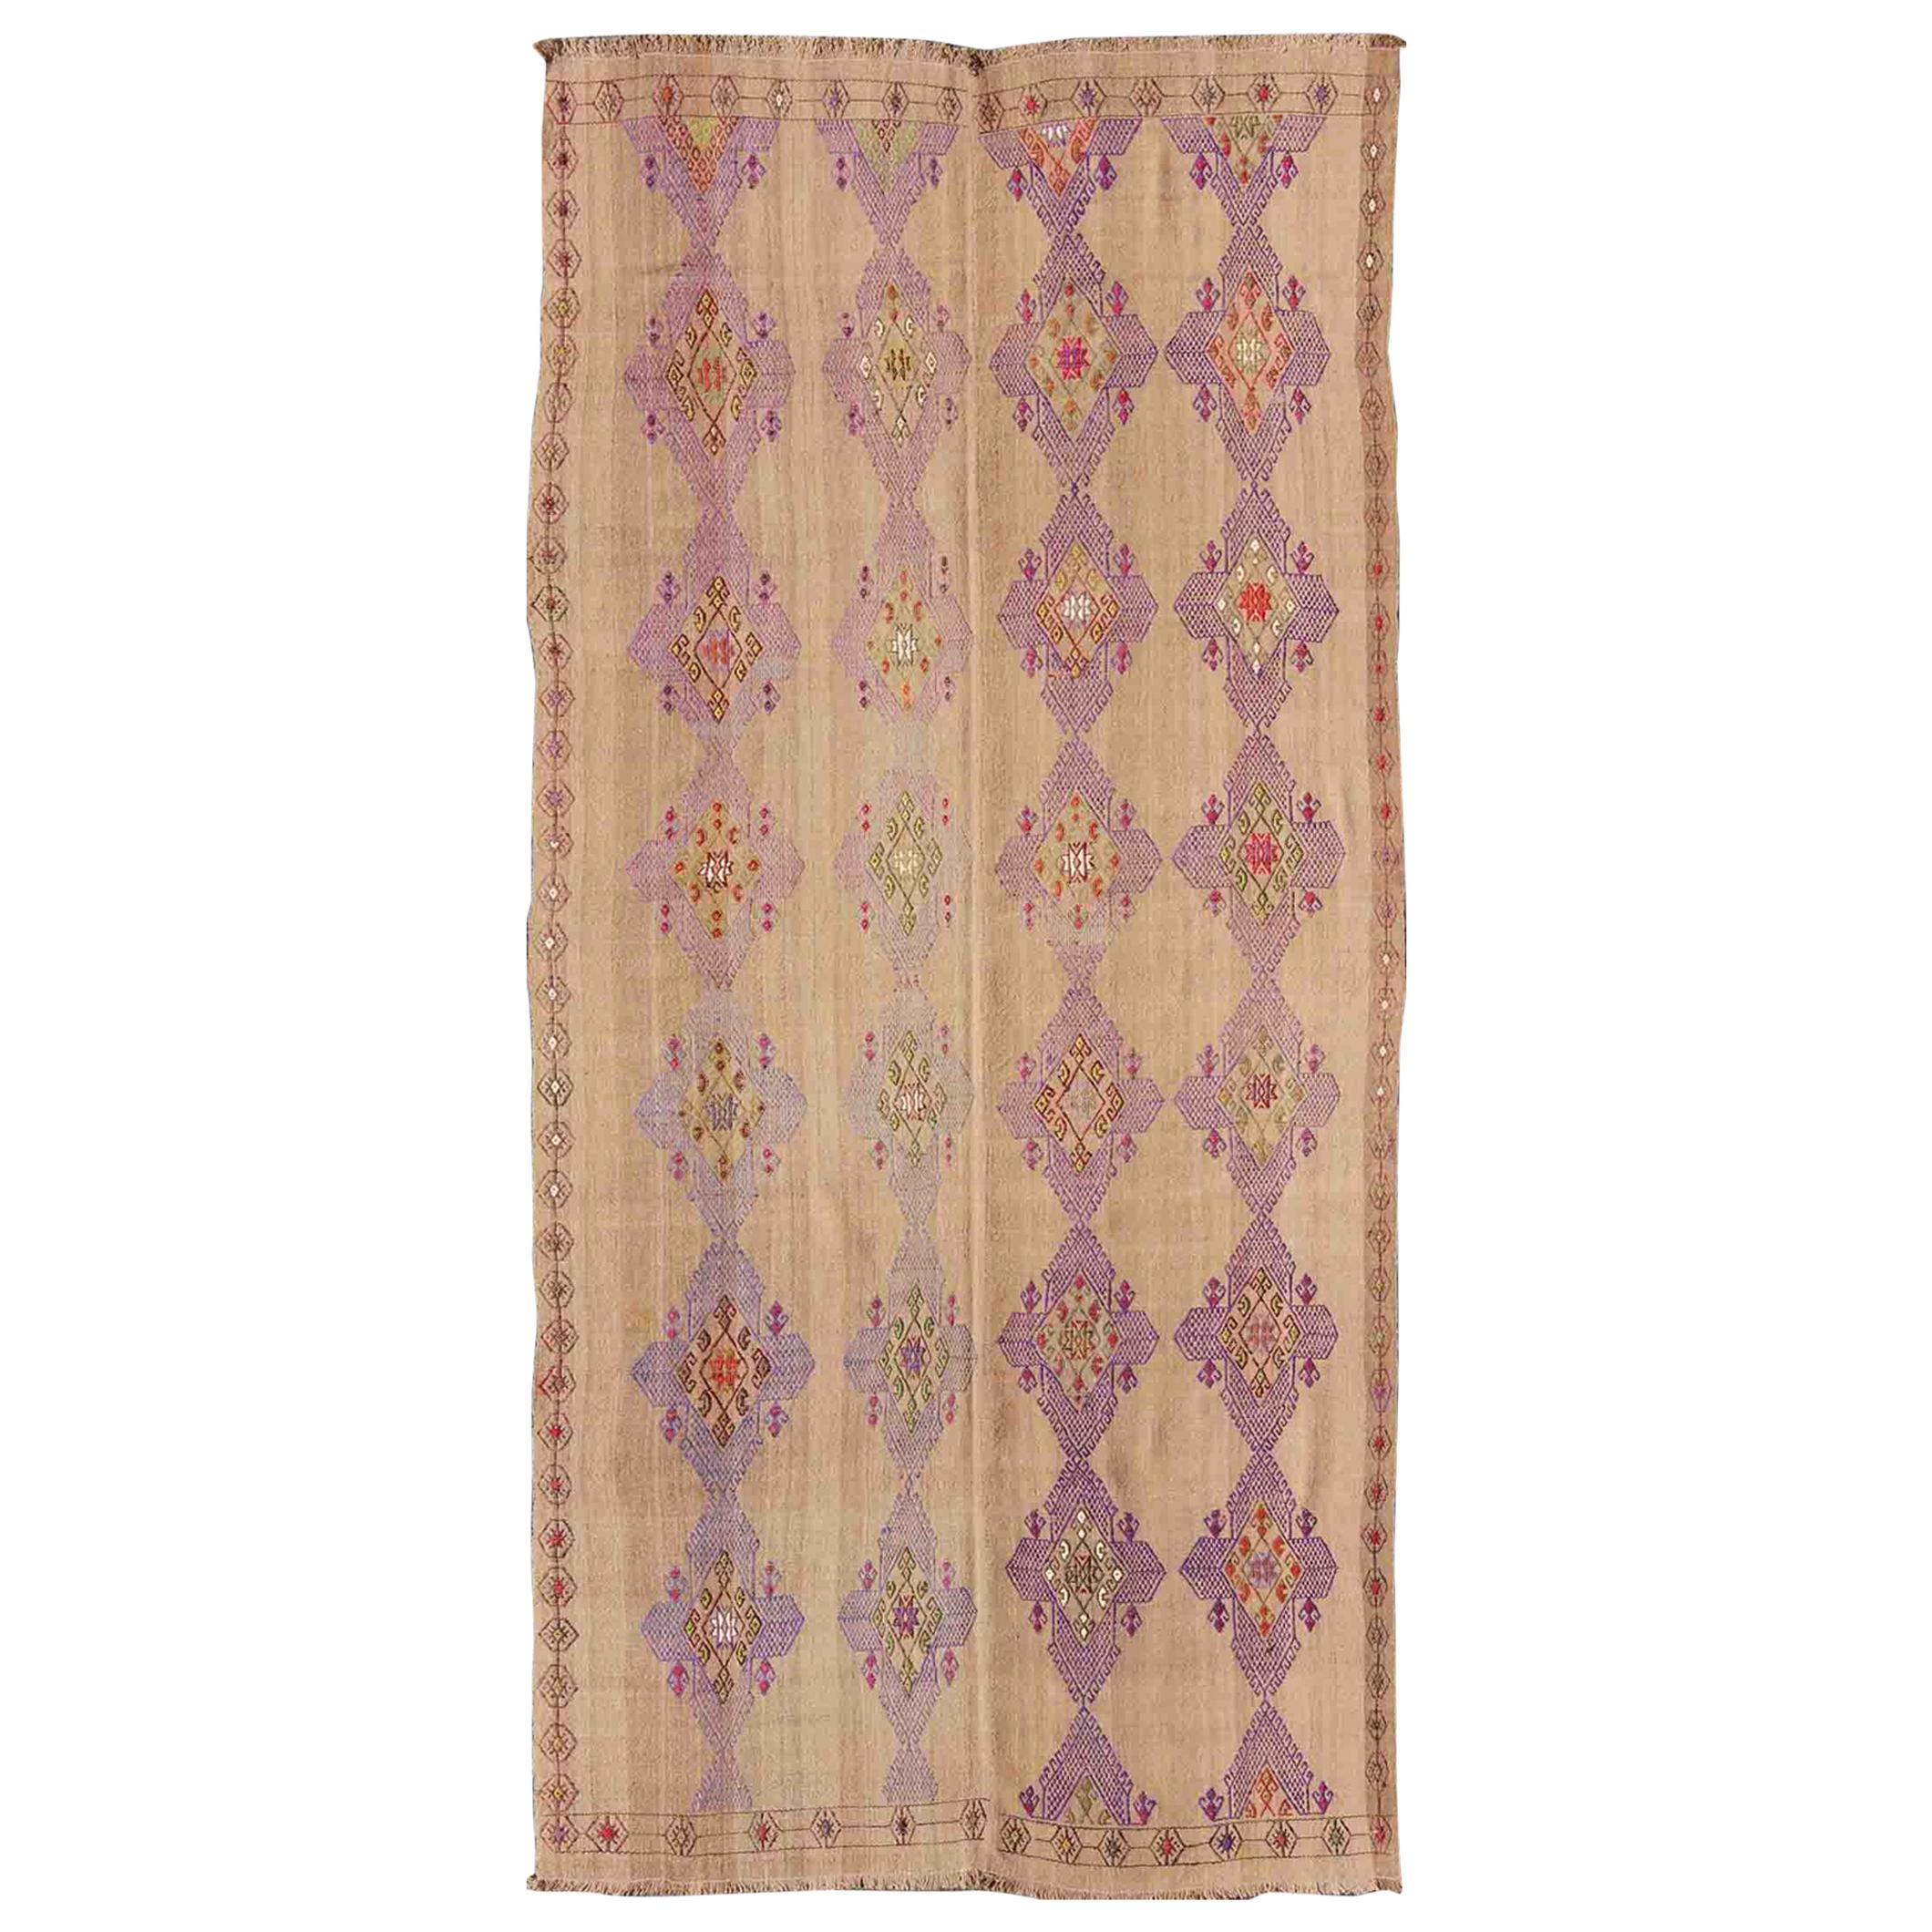 Turkish Kilim Hand Woven Embroidered Purple Diamonds on a Tan Background For Sale